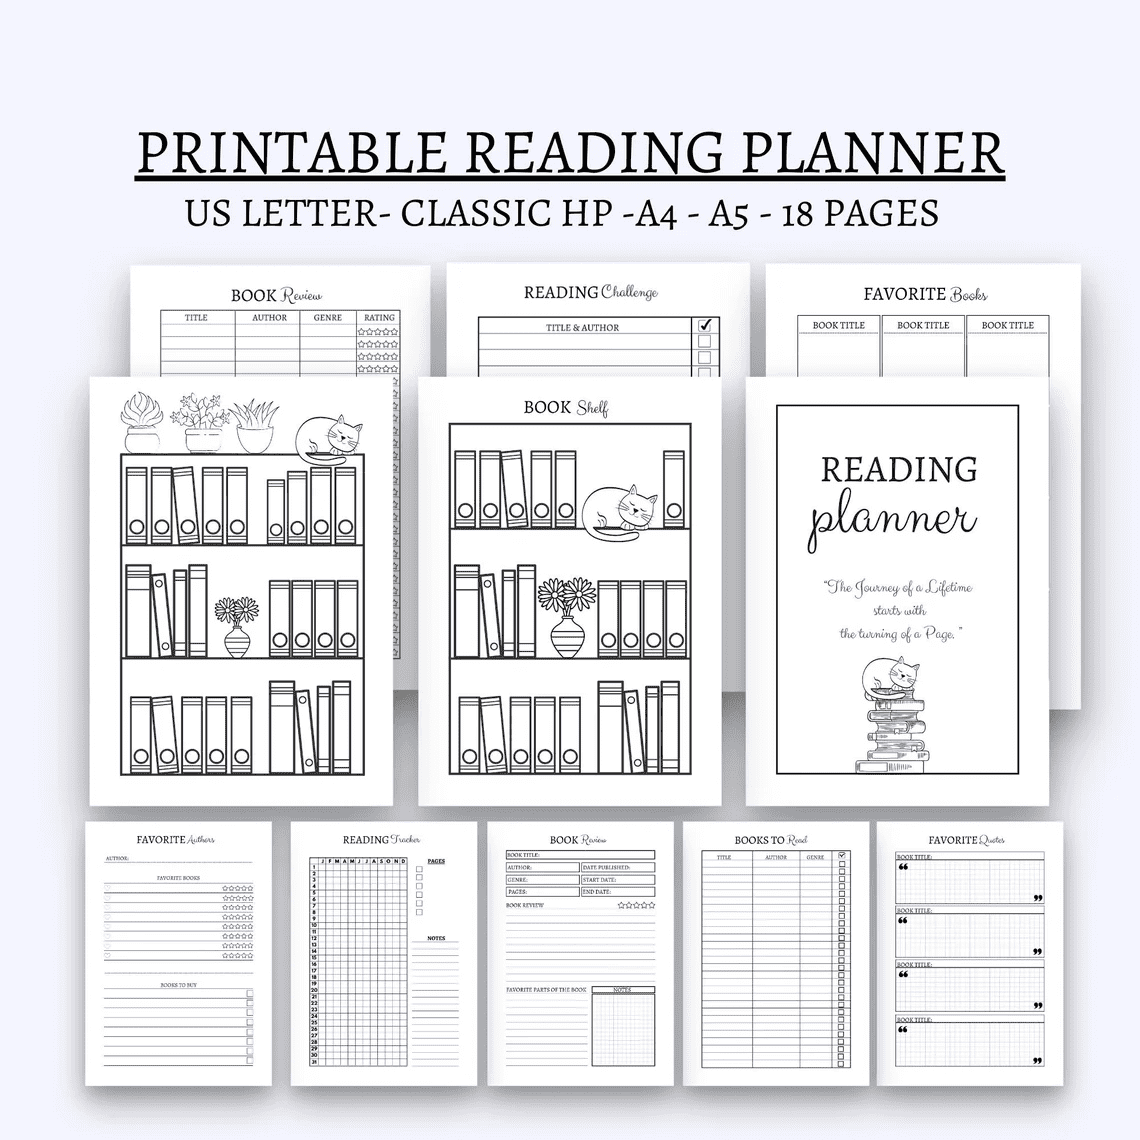 All the types of pages in the printable reading planner